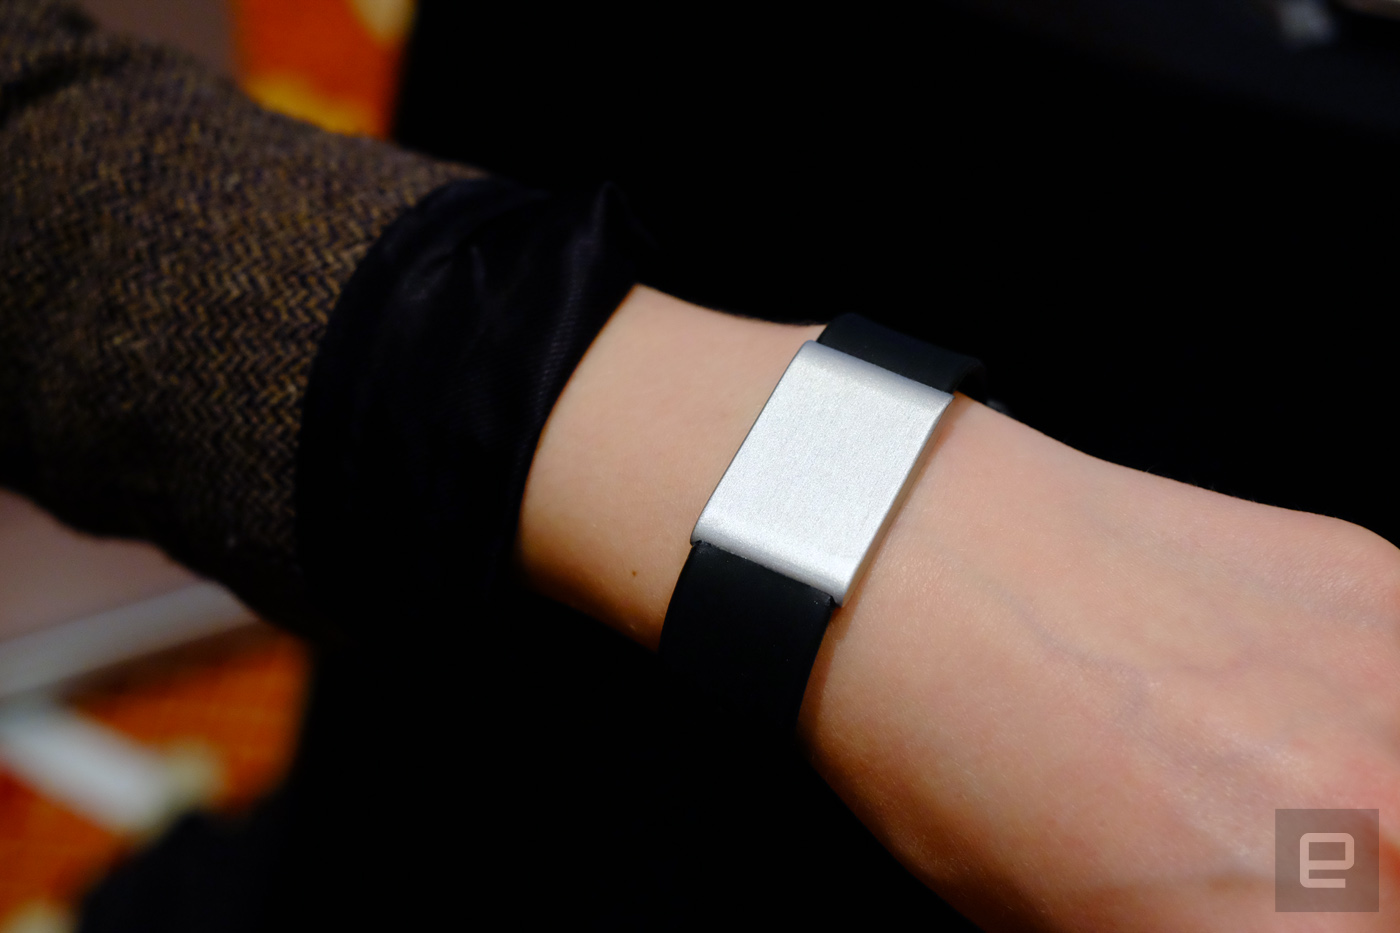 This wearable wants you to spend more time with your friends